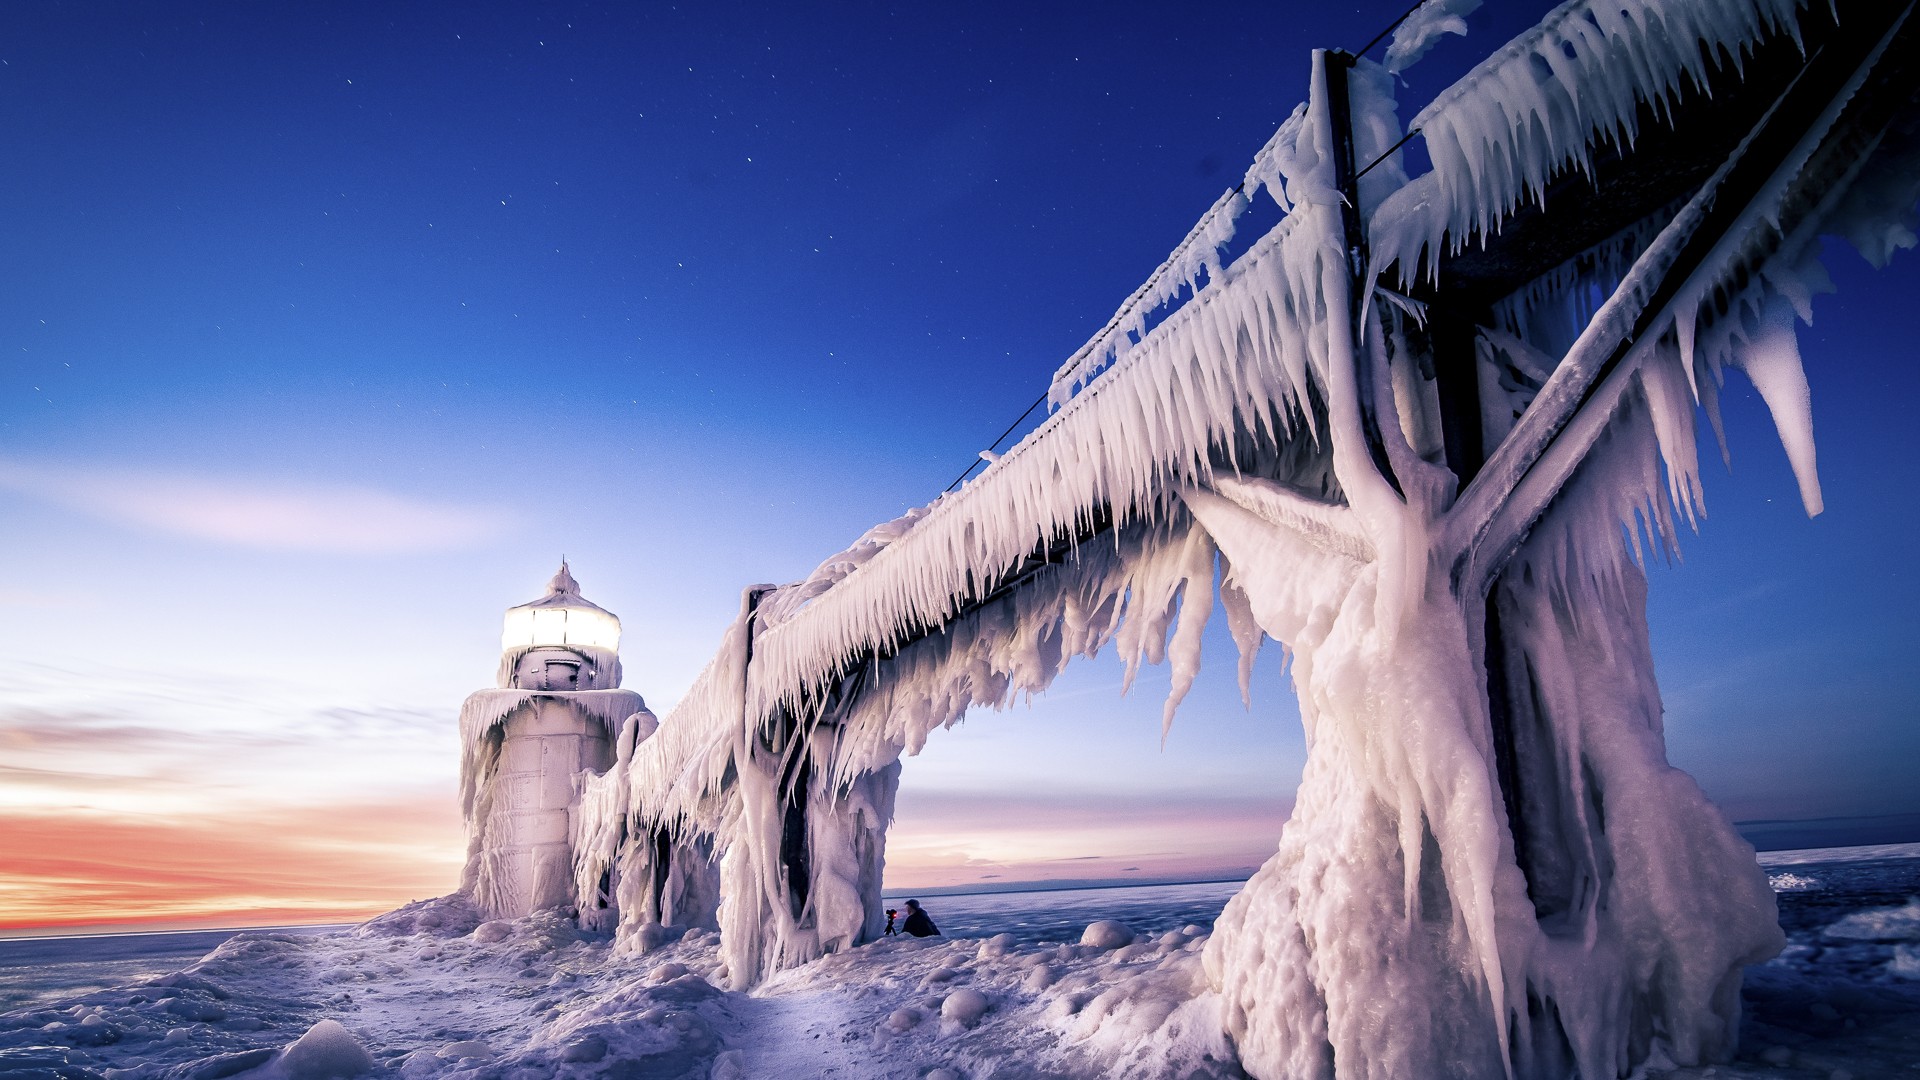 General 1920x1080 ice lighthouse nature landscape cold frost winter snow sky outdoors